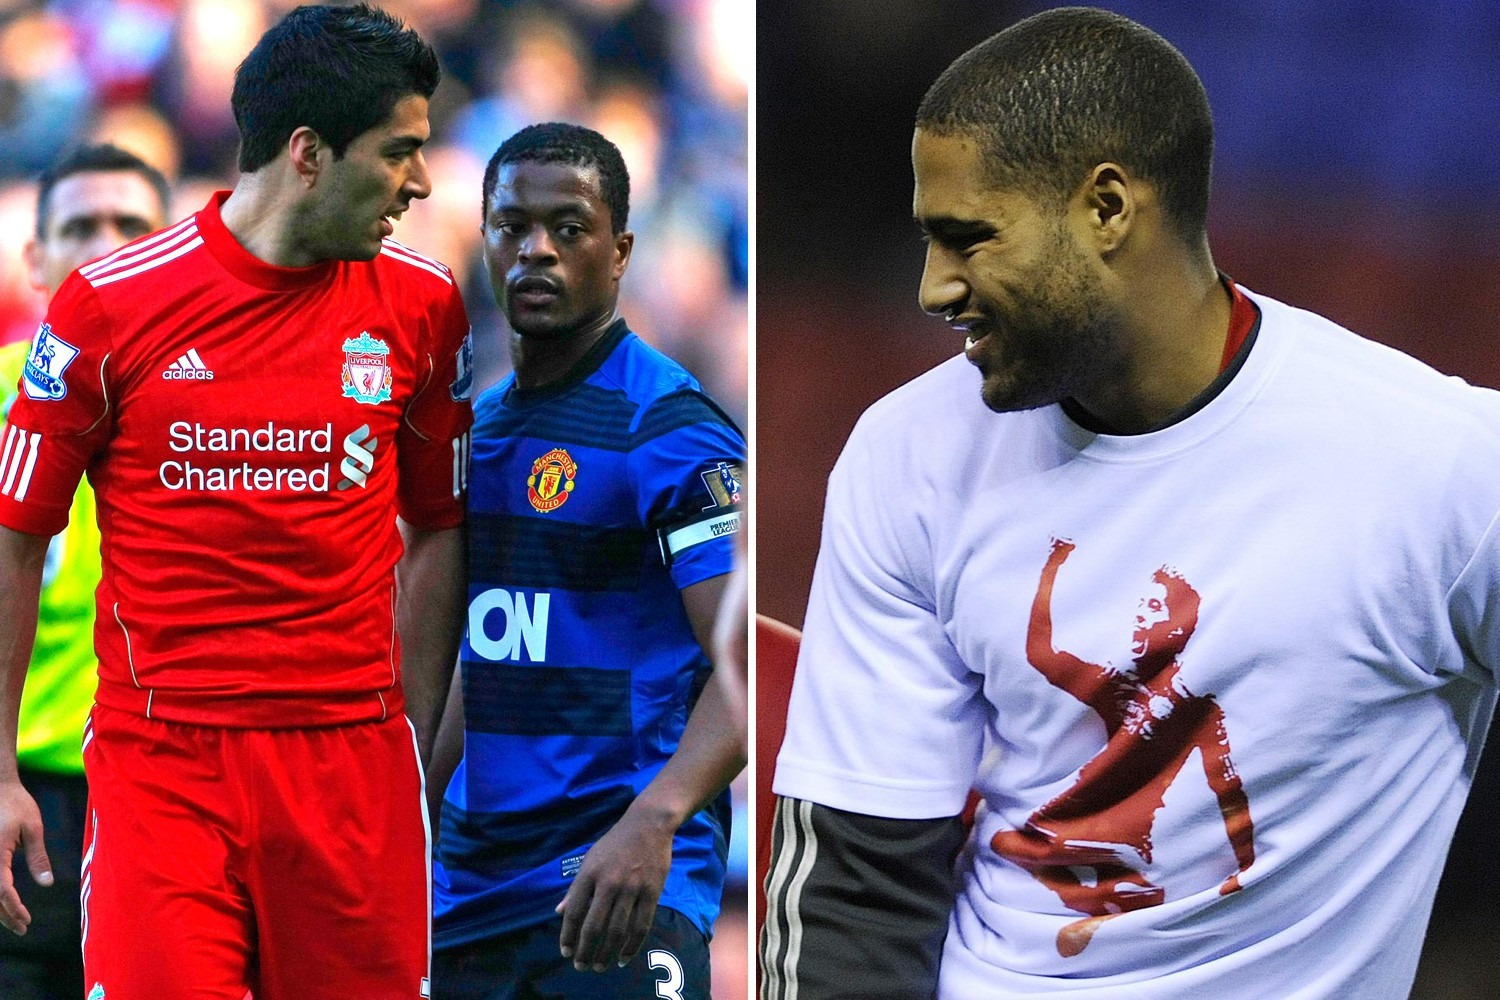 , Ex-Liverpool defender Glen Johnson insists Luis Suarez is not a racist as he backs Carraghers apology to Evra